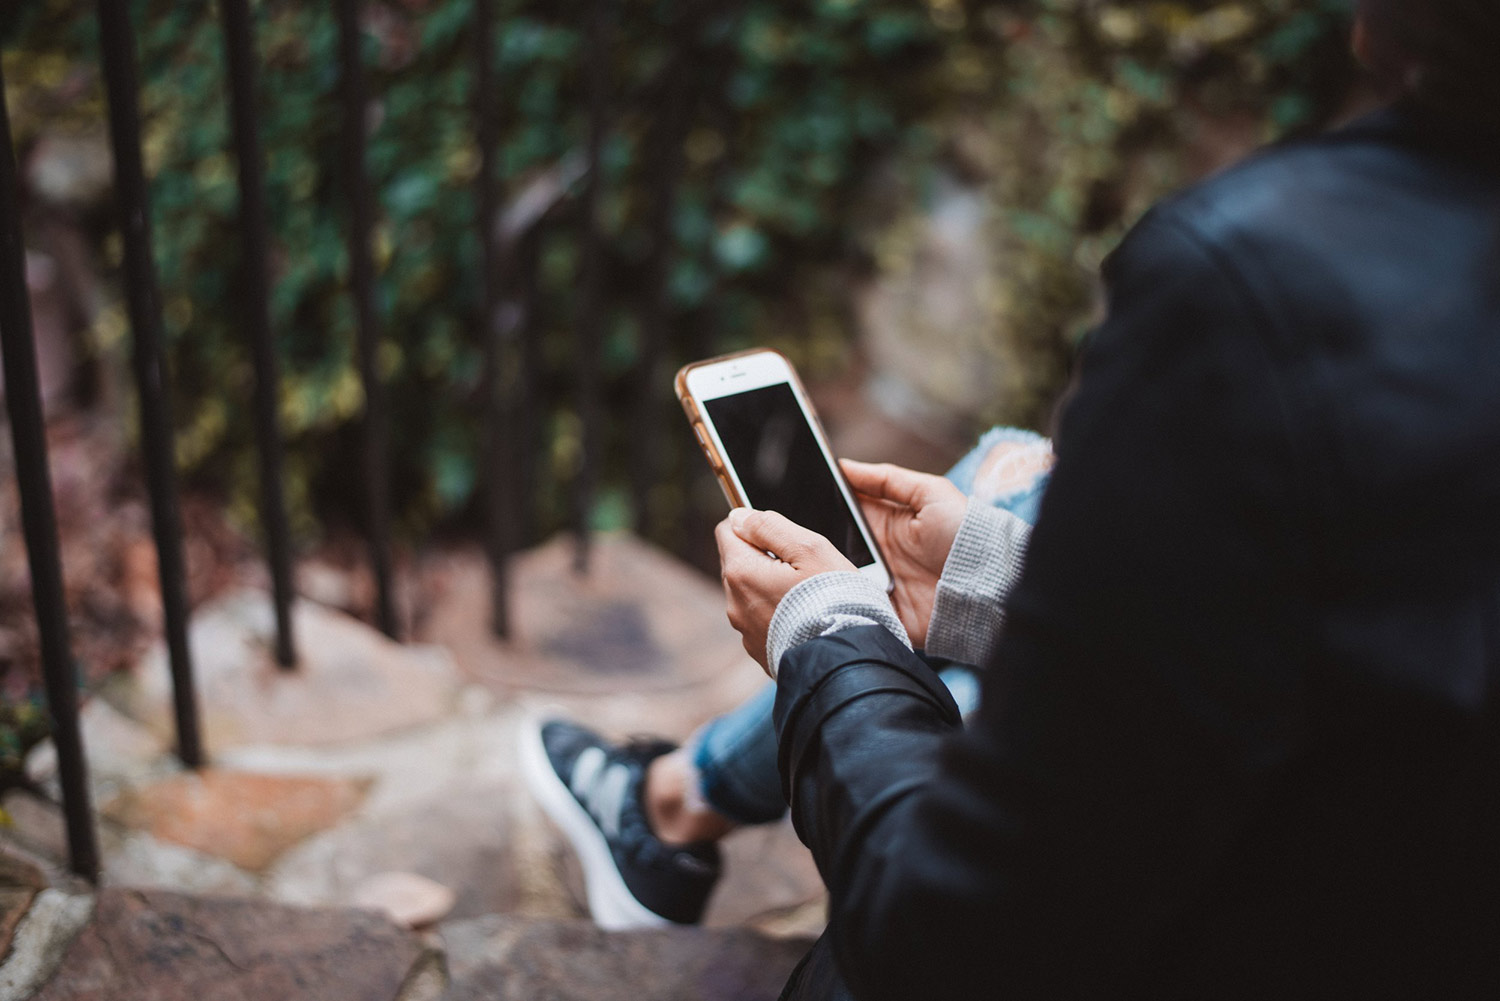 Sitting outdoors, looking at a phone. Priority Health